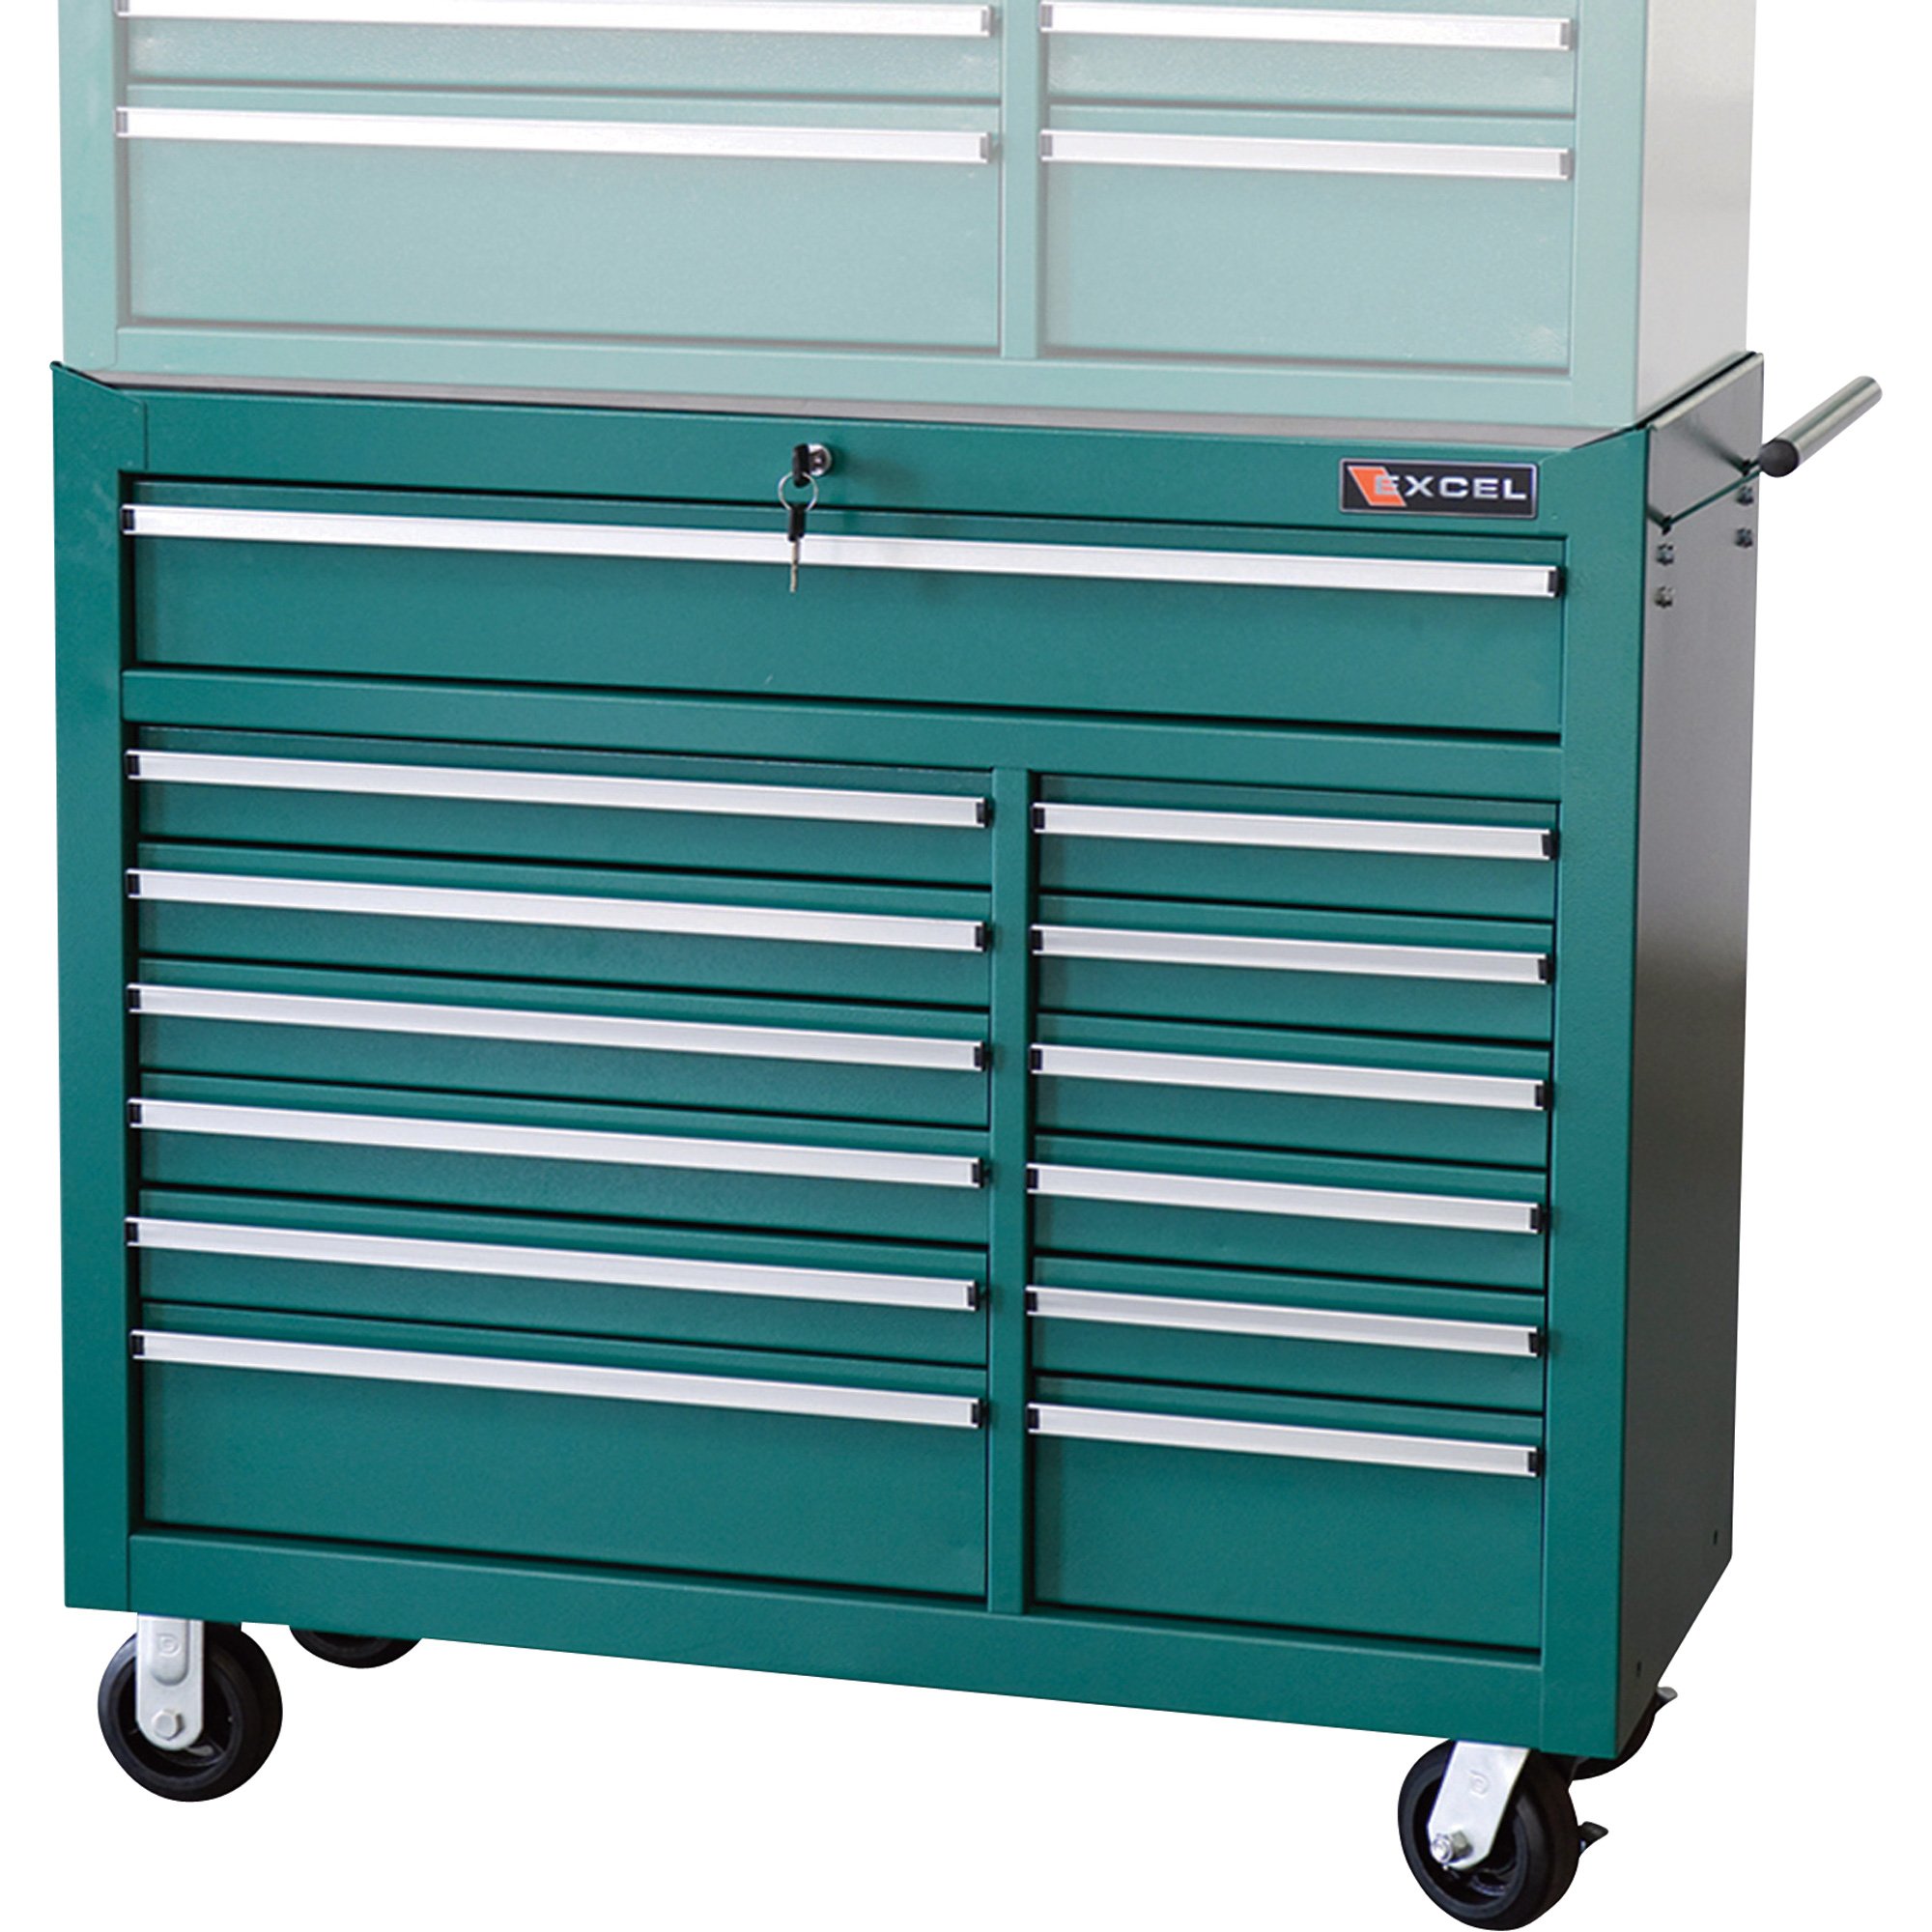 Excel 13-Drawer Rolling Tool Cabinet — 880-Lb. Capacity, Model# TBR4013X- Teal